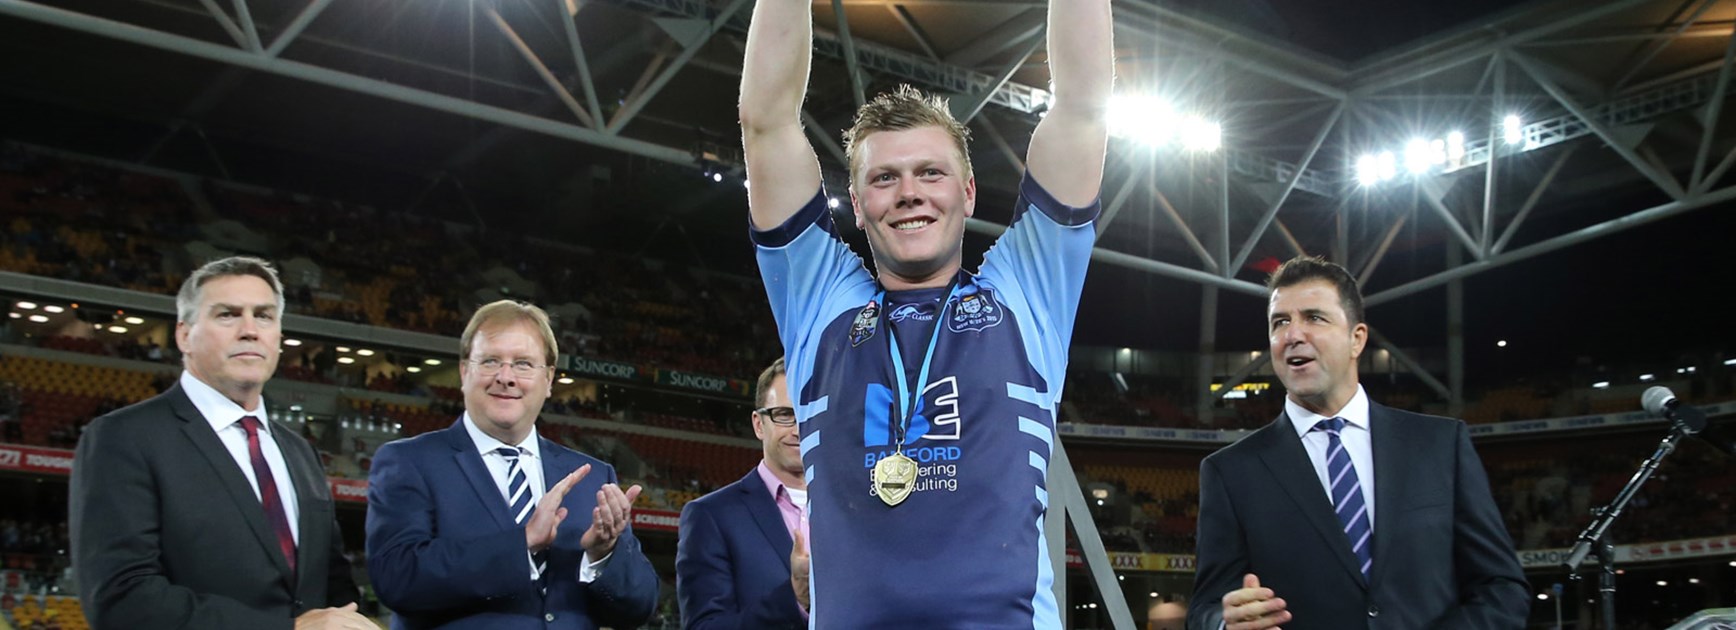 NSW under-20s captain Drew Hutchison led his side to another win over the Queensland under-20s.